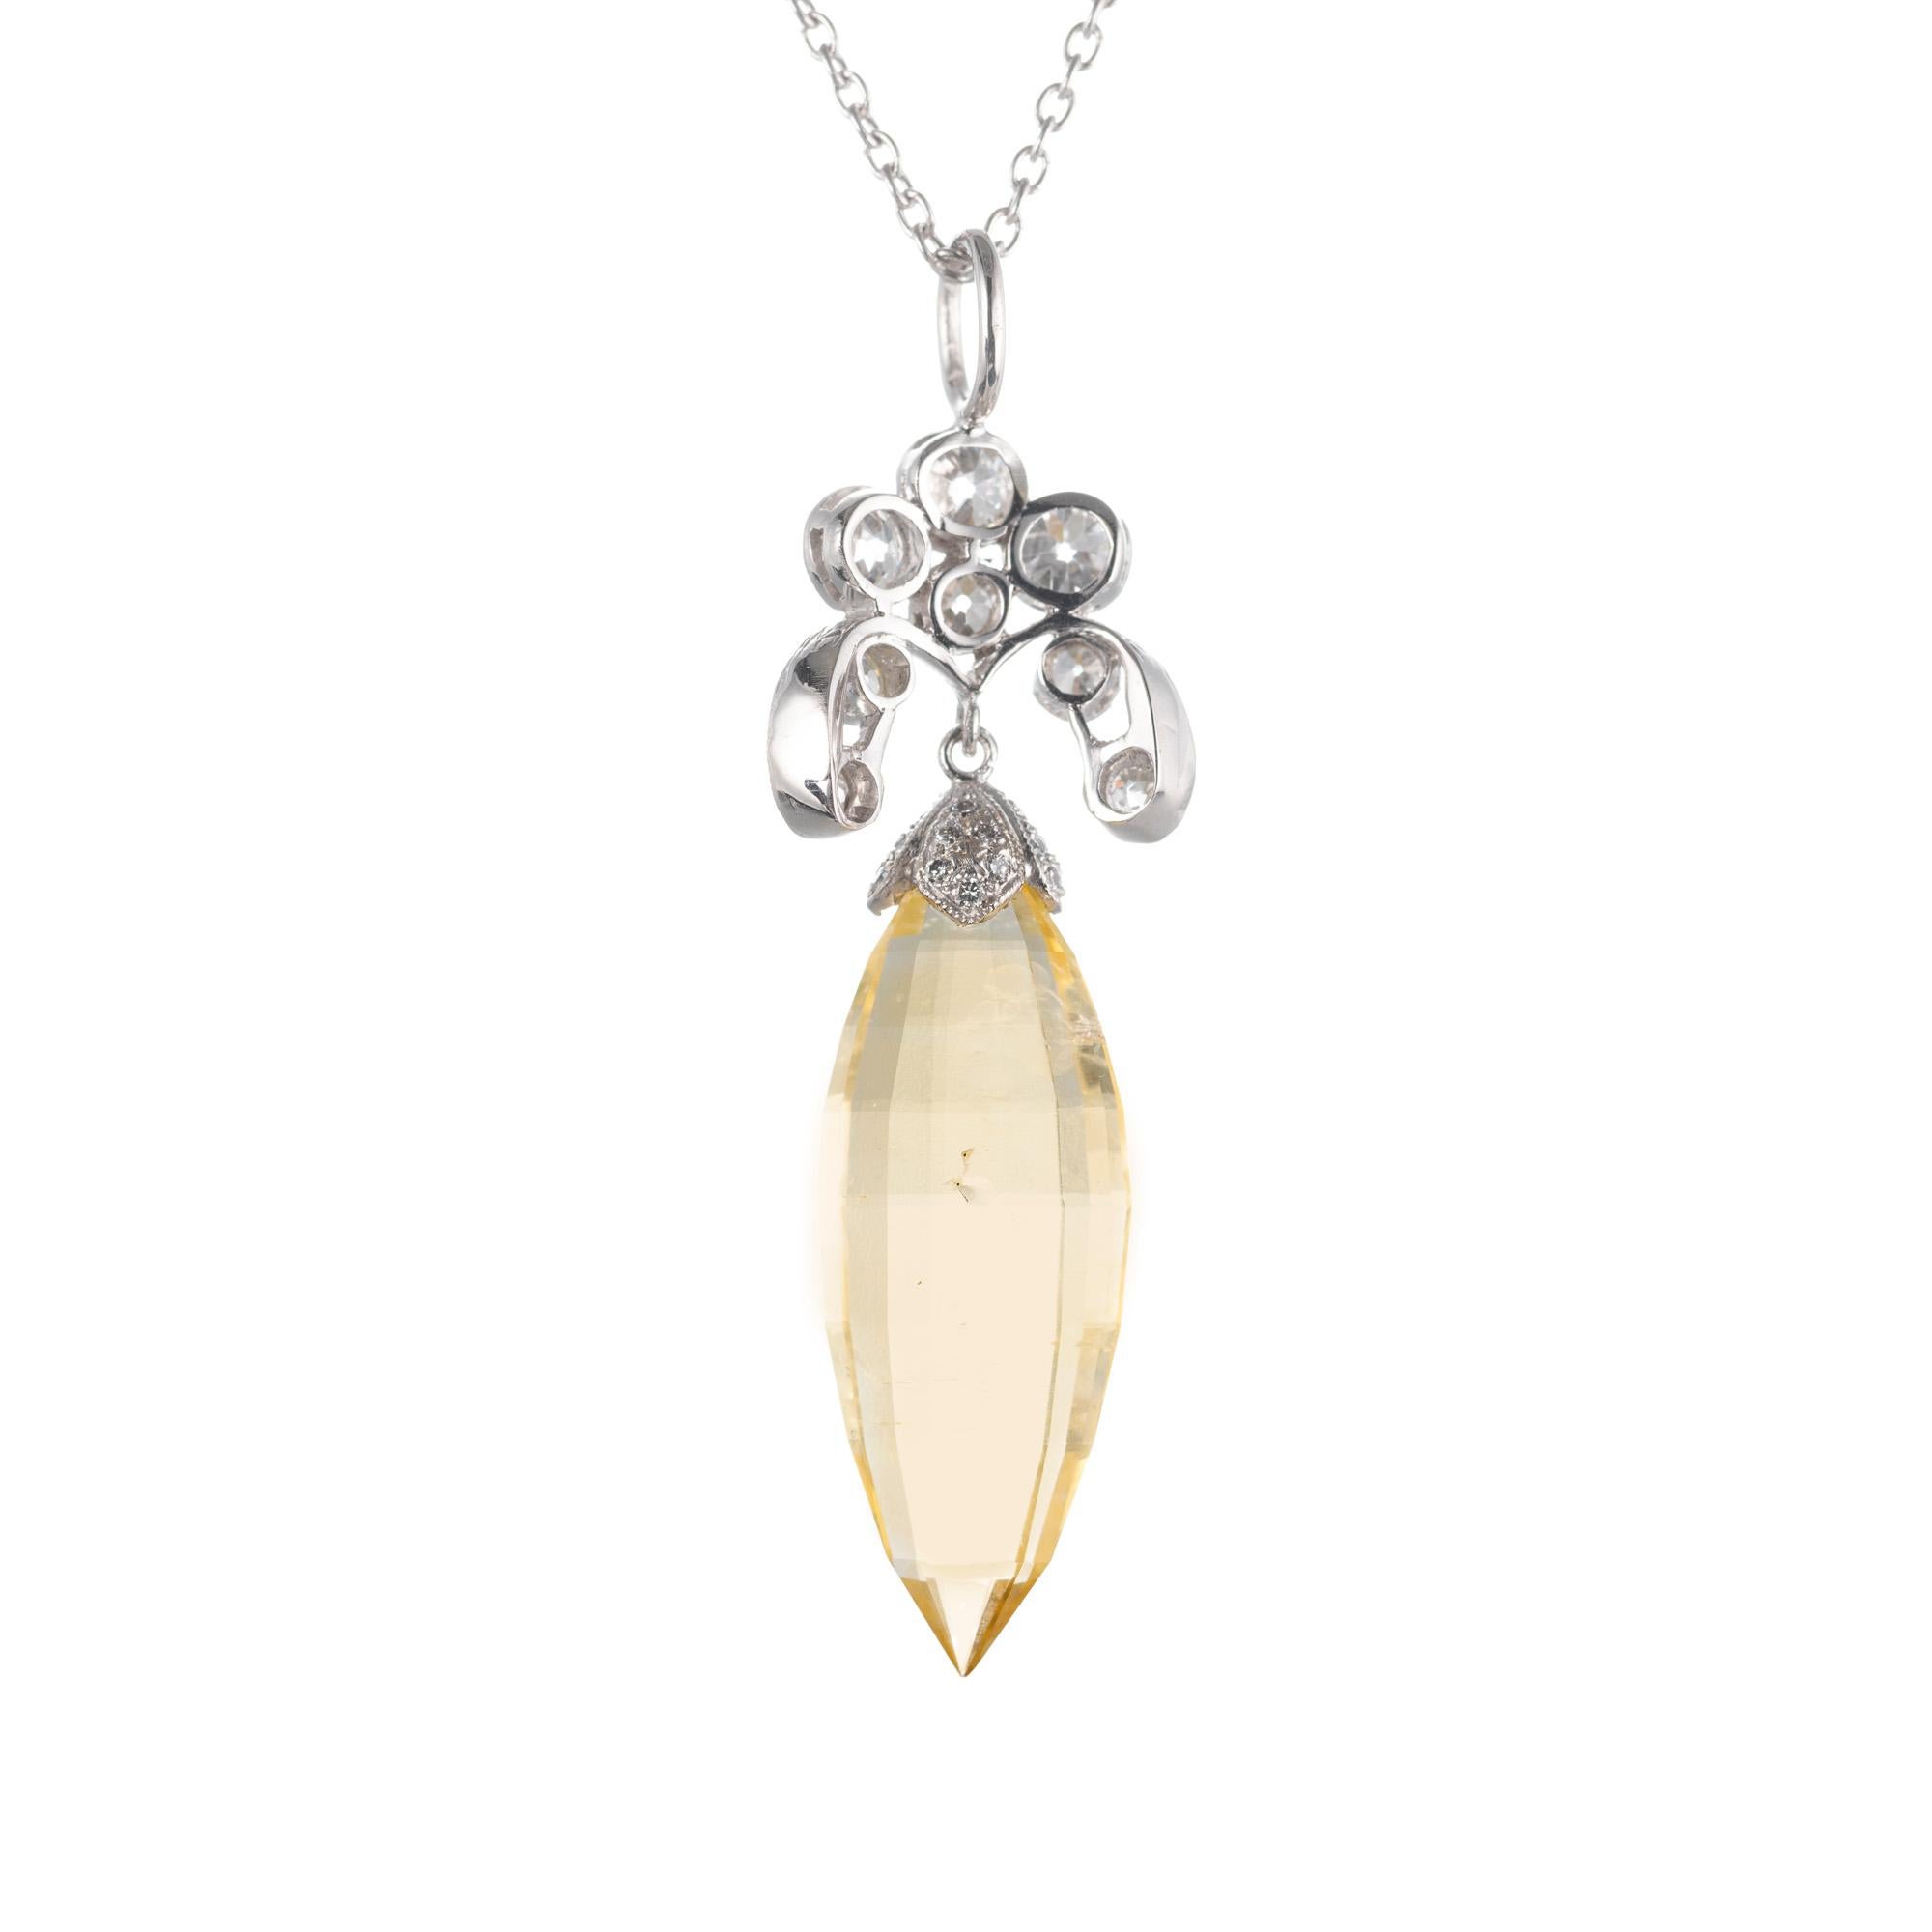 Art Deco yellow marquise briolette sapphire and diamond necklace pendant. Gia certified natural no heat sapphire with 30 accent diamonds on a platinum chain.  circa 1920's.

1 marquise briolette I natural inclusions yellow sapphire, Approximate